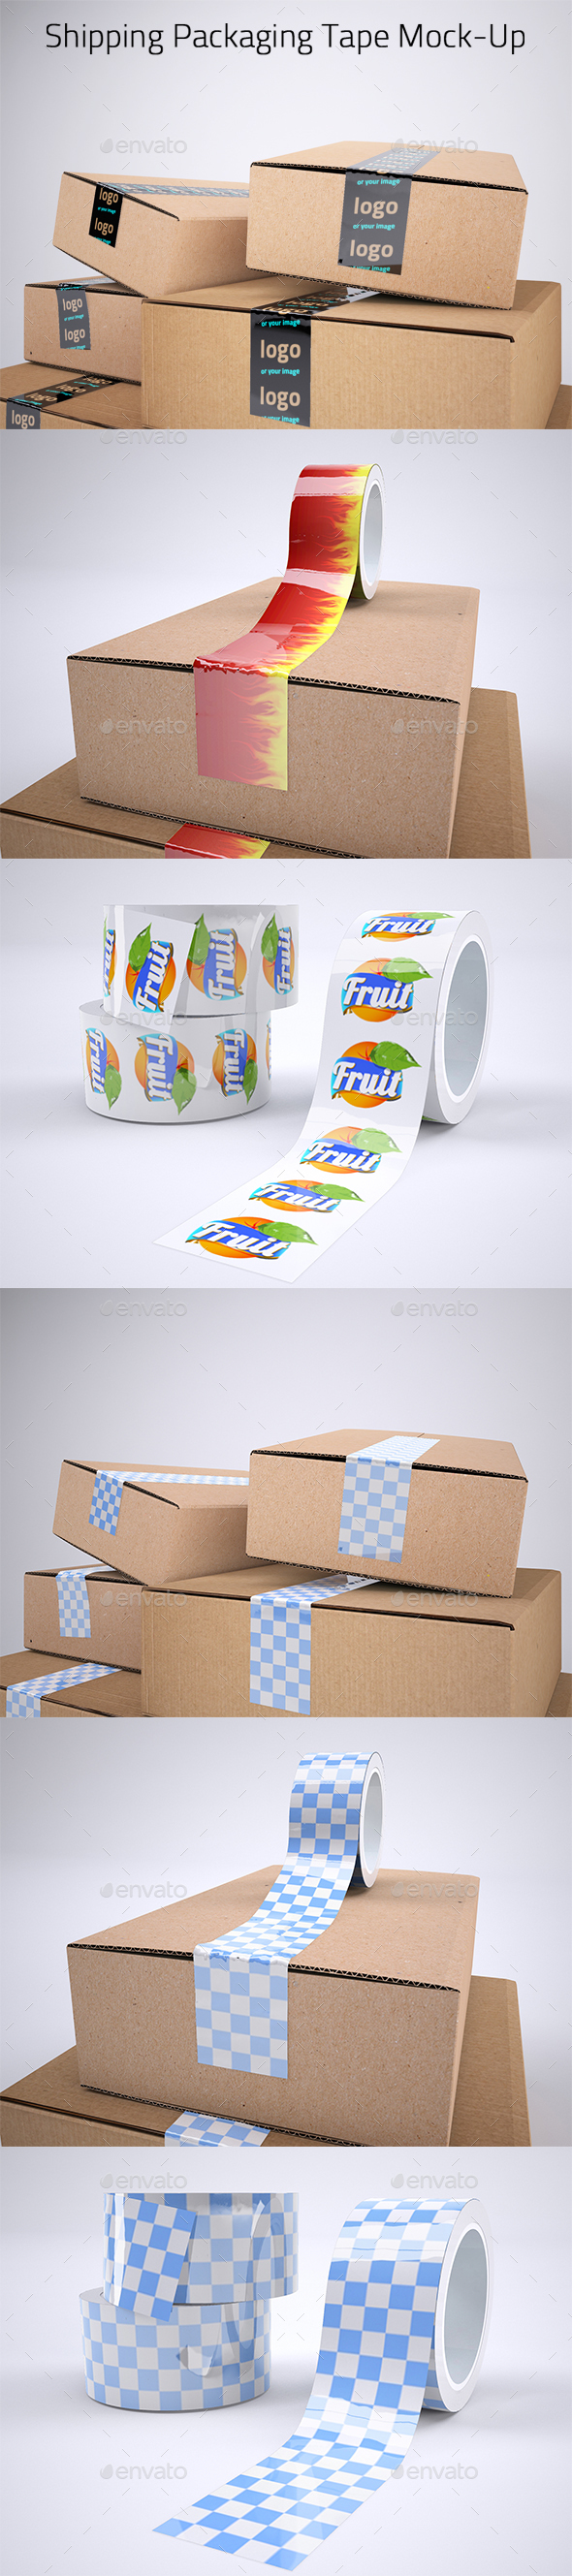 Shipping Packaging Tape Mock Up By Sanchi477 Graphicriver